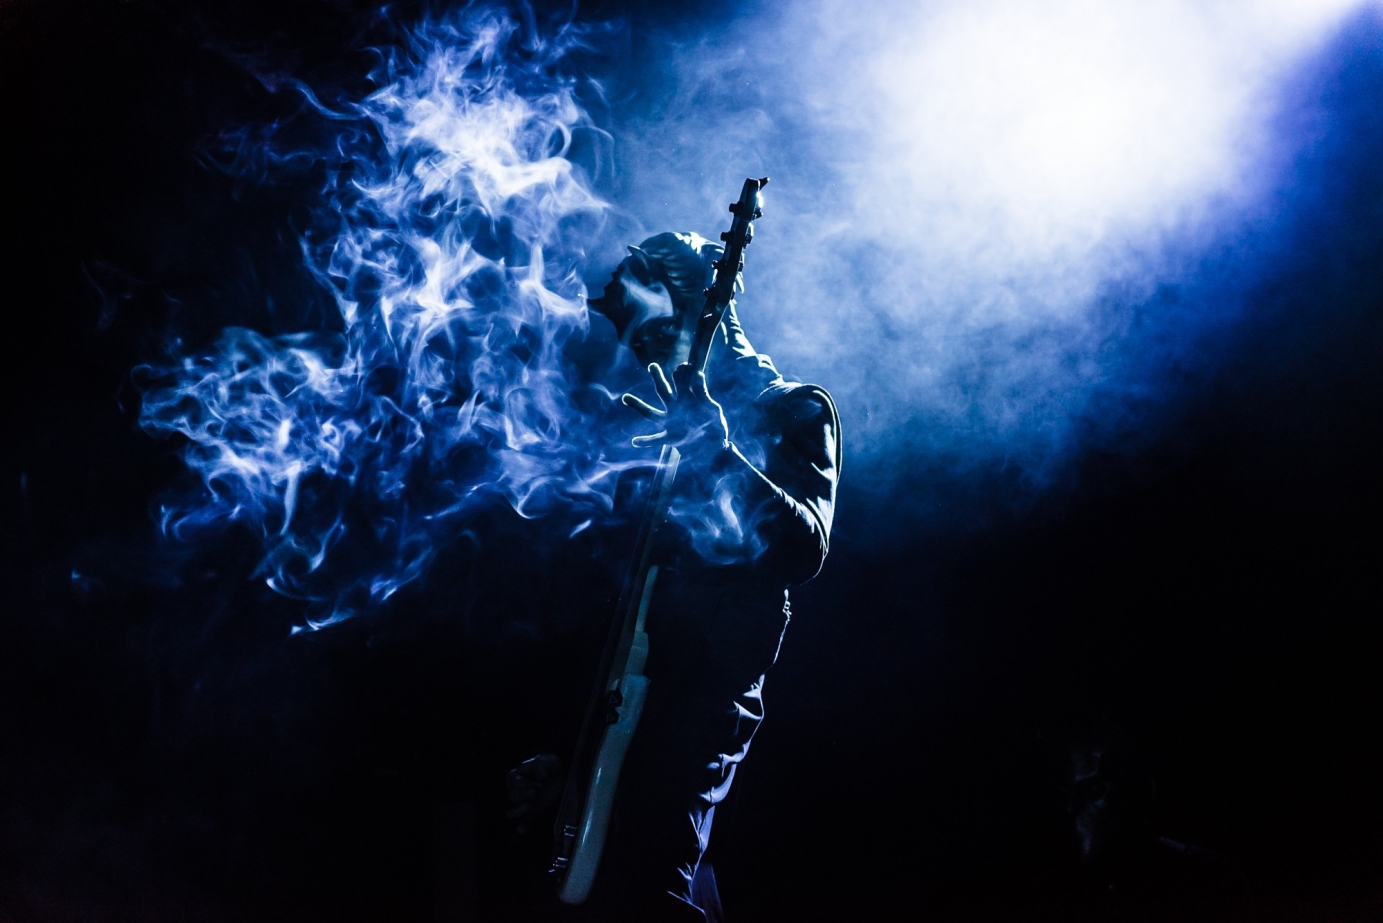 Guitarist from the band ghost, wearing a mask, smoke billowing out of the guitar, highlights and shadows brining an emotive feel to the darkness